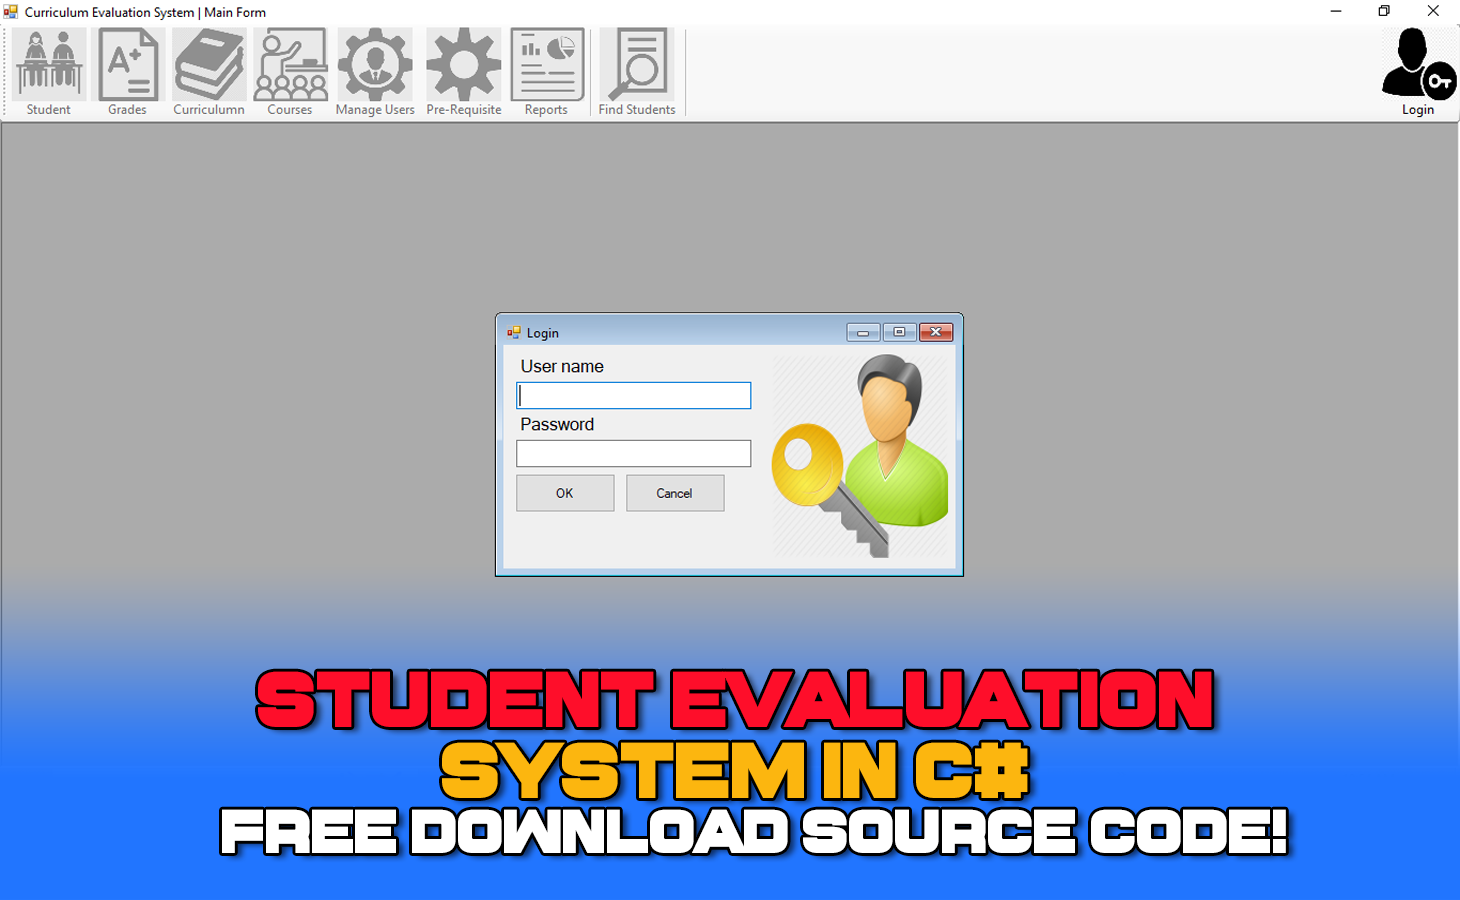 Student Evaluation System In C#